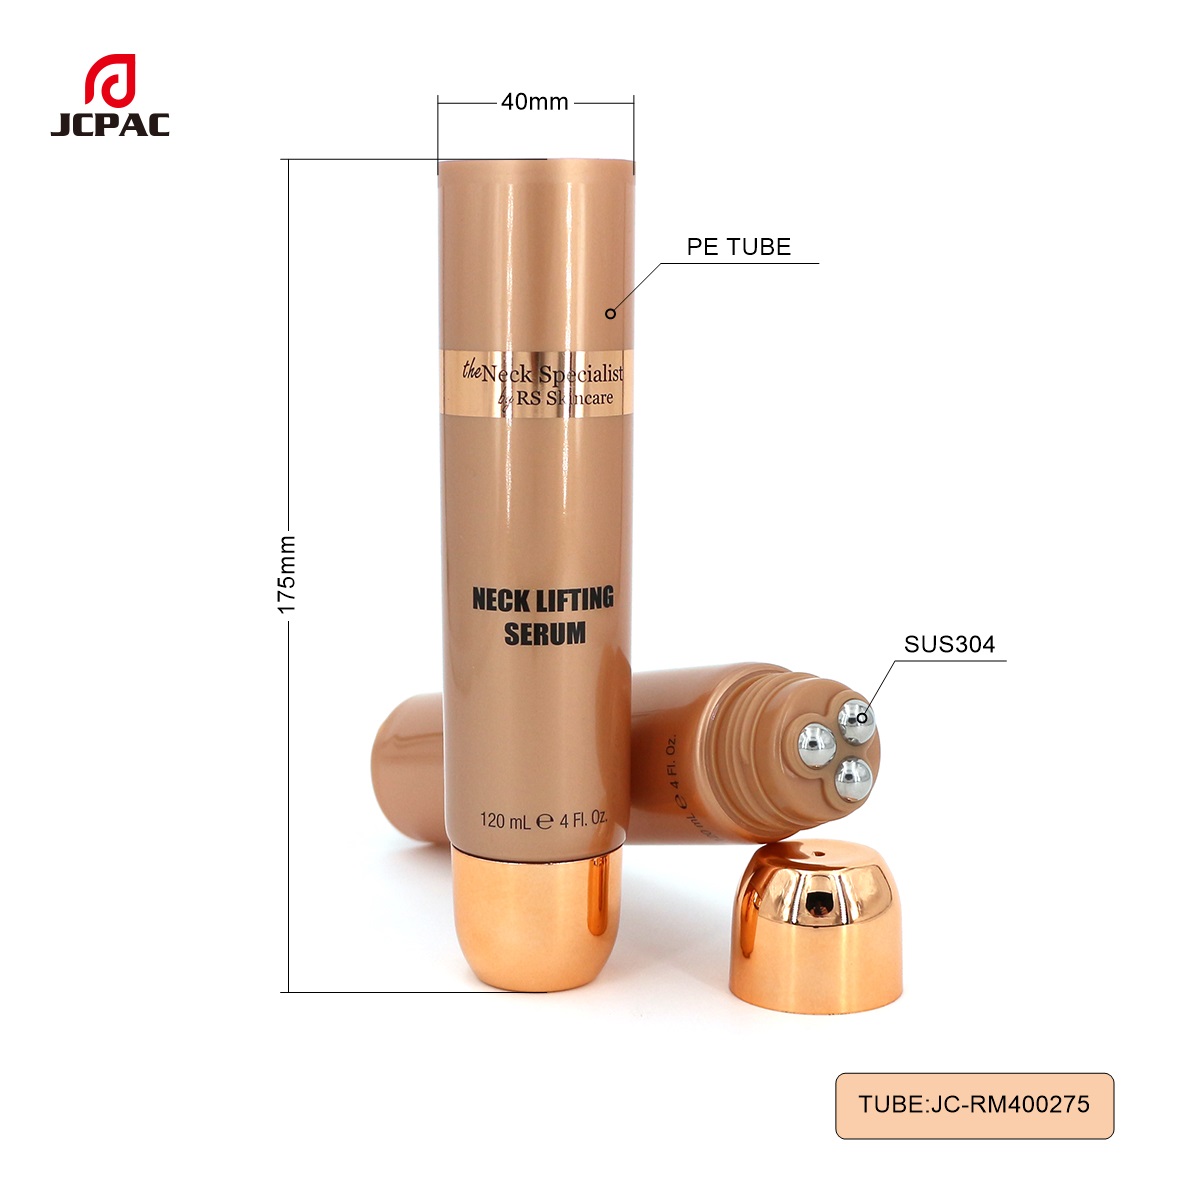 RM400275 40mm 120ml Neck Lifting Serum Tube With 3 Roller Ball Applicator